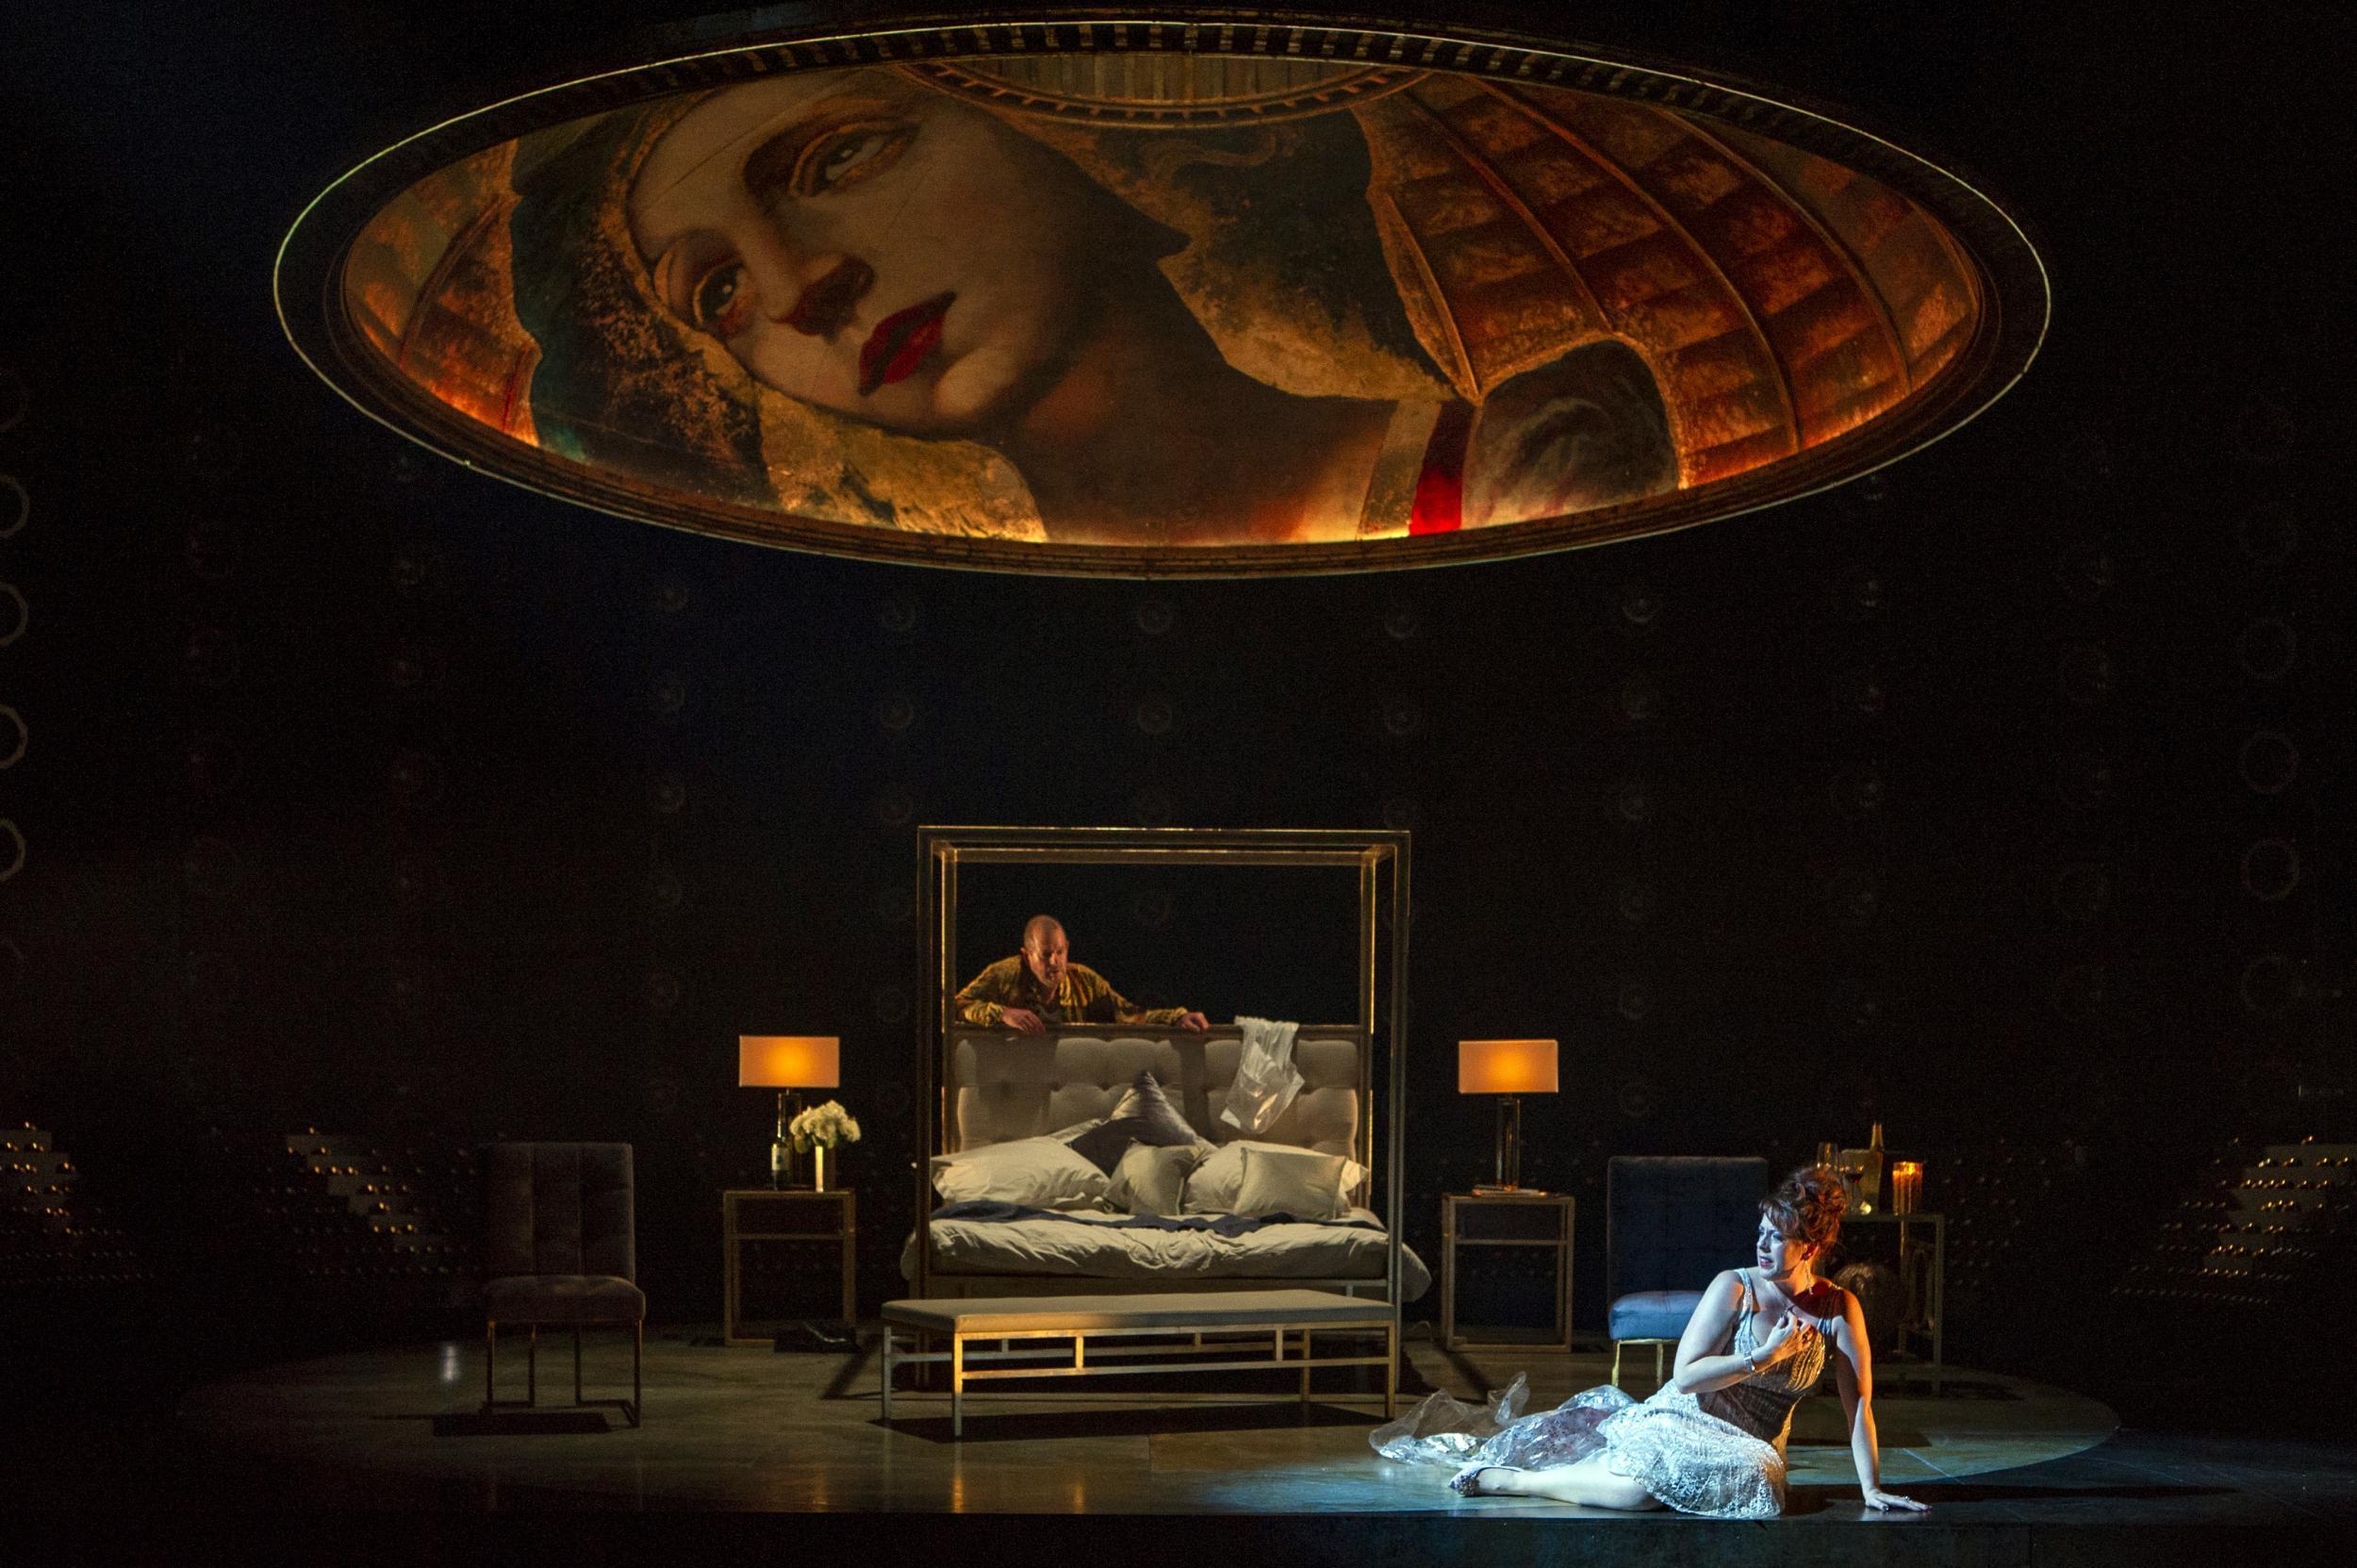 This superb production of Puccini's Tosca is viscerally shocking in its violence